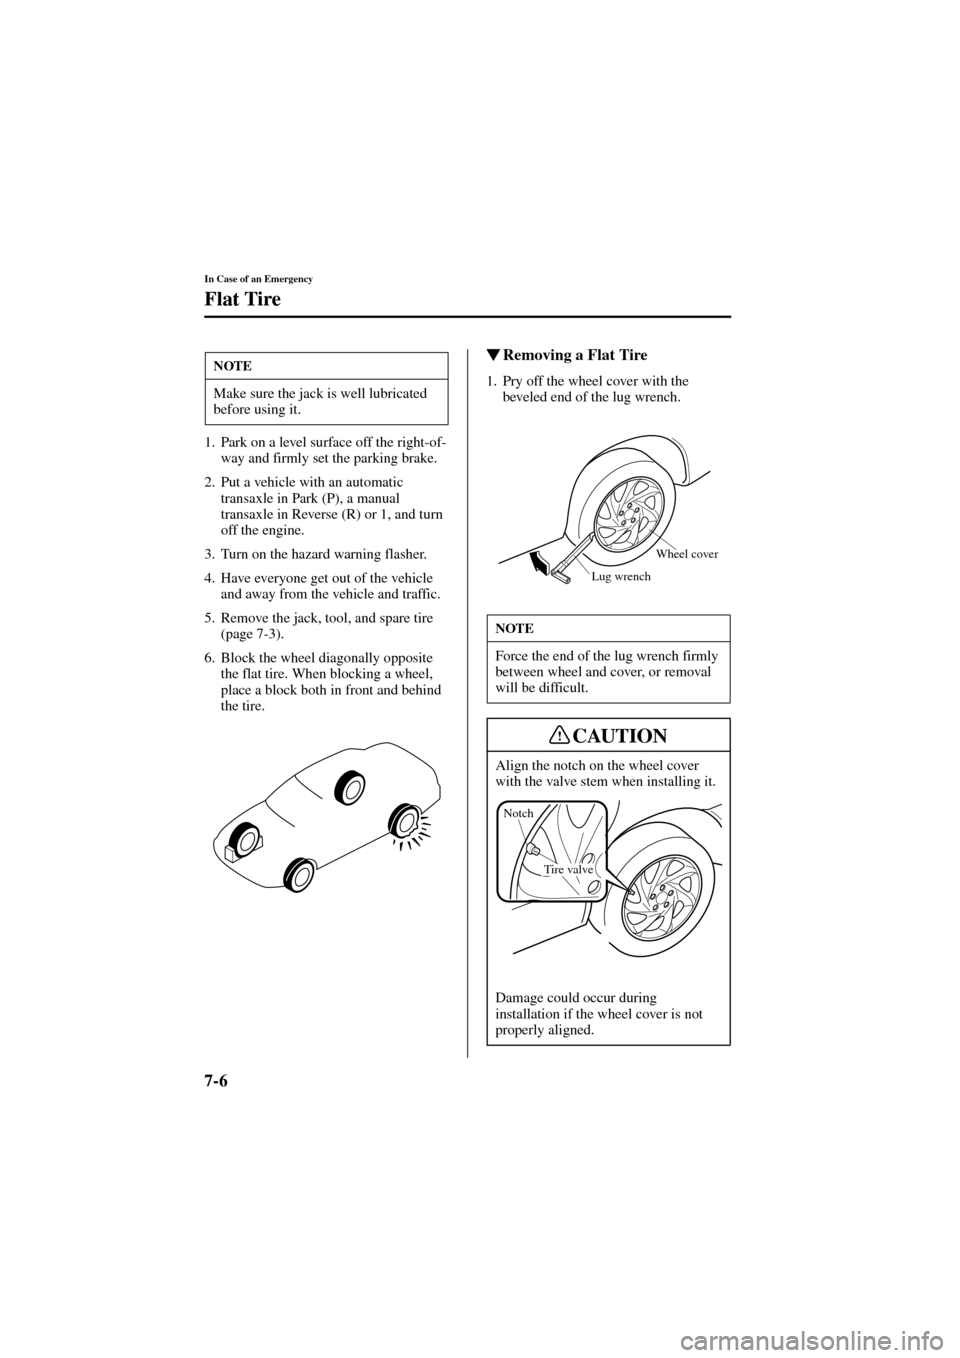 MAZDA MODEL 6 2004   (in English) Owners Manual 7-6
In Case of an Emergency
Flat Tire
Form No. 8R29-EA-02I
1. Park on a level surface off the right-of-
way and firmly set the parking brake.
2. Put a vehicle with an automatic 
transaxle in Park (P),